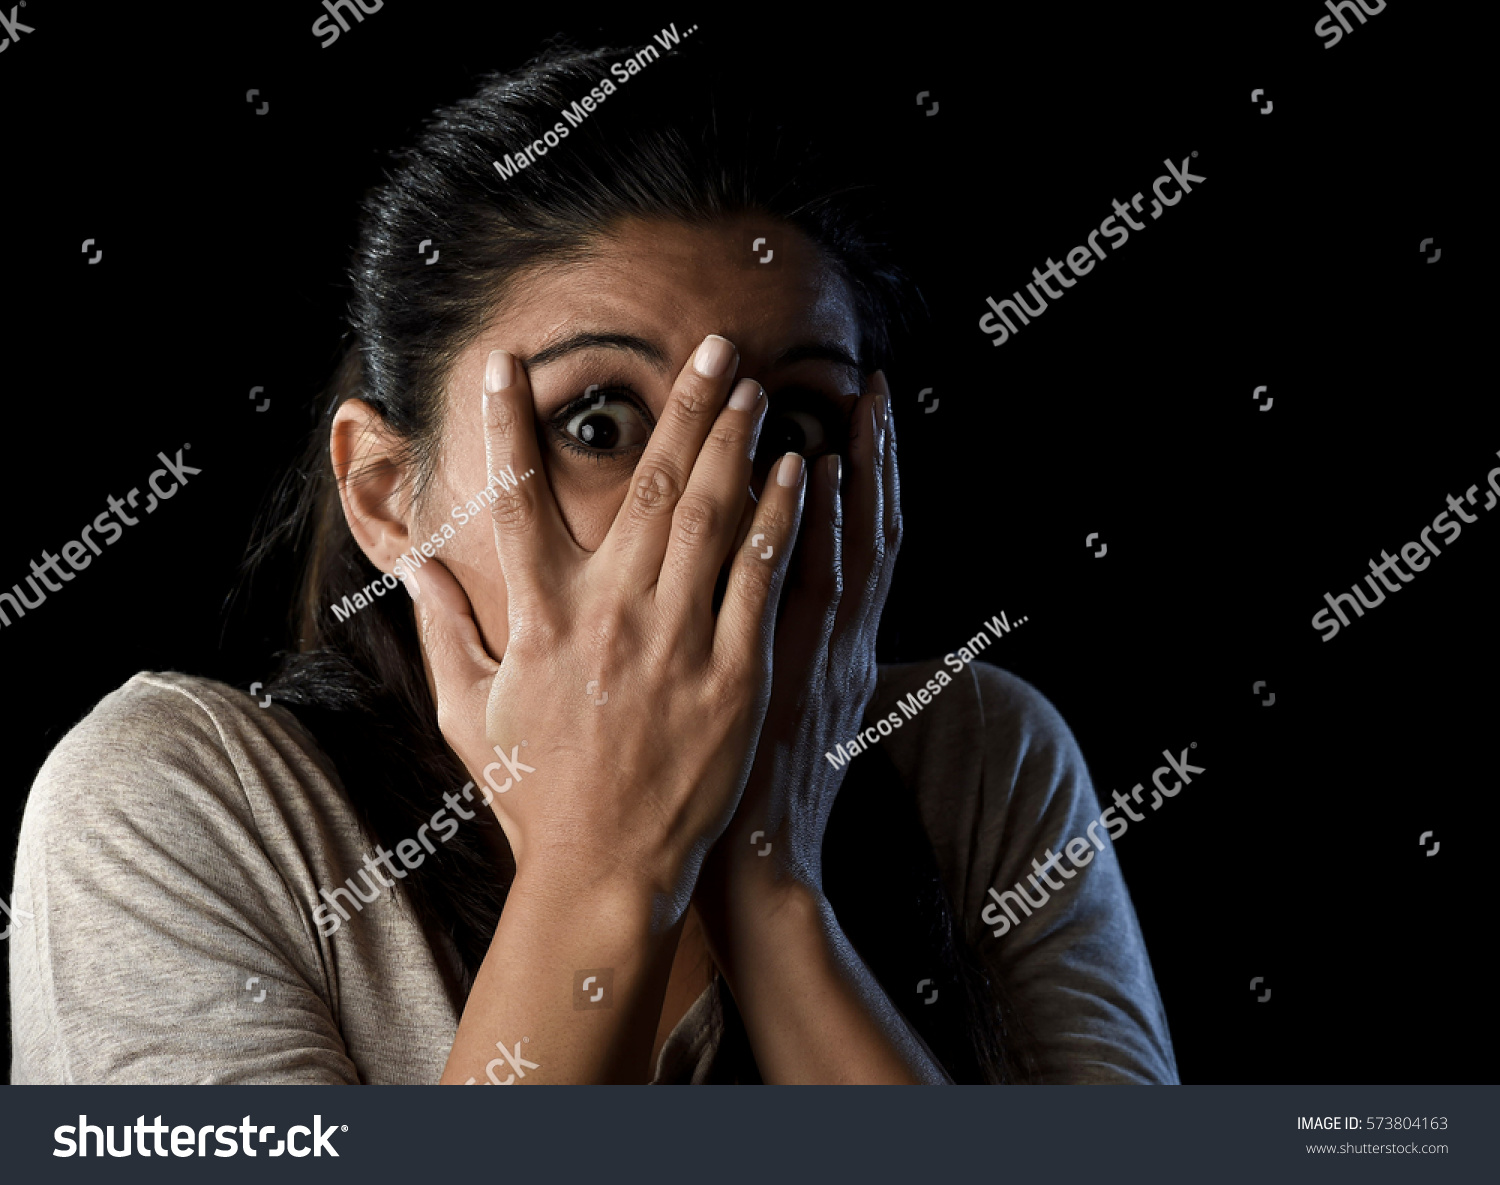 close up portrait young attractive Latin woman desperate and scared isolated on black background looking terrorized and horrified covering her eyes in primal fear emotion face expression #573804163